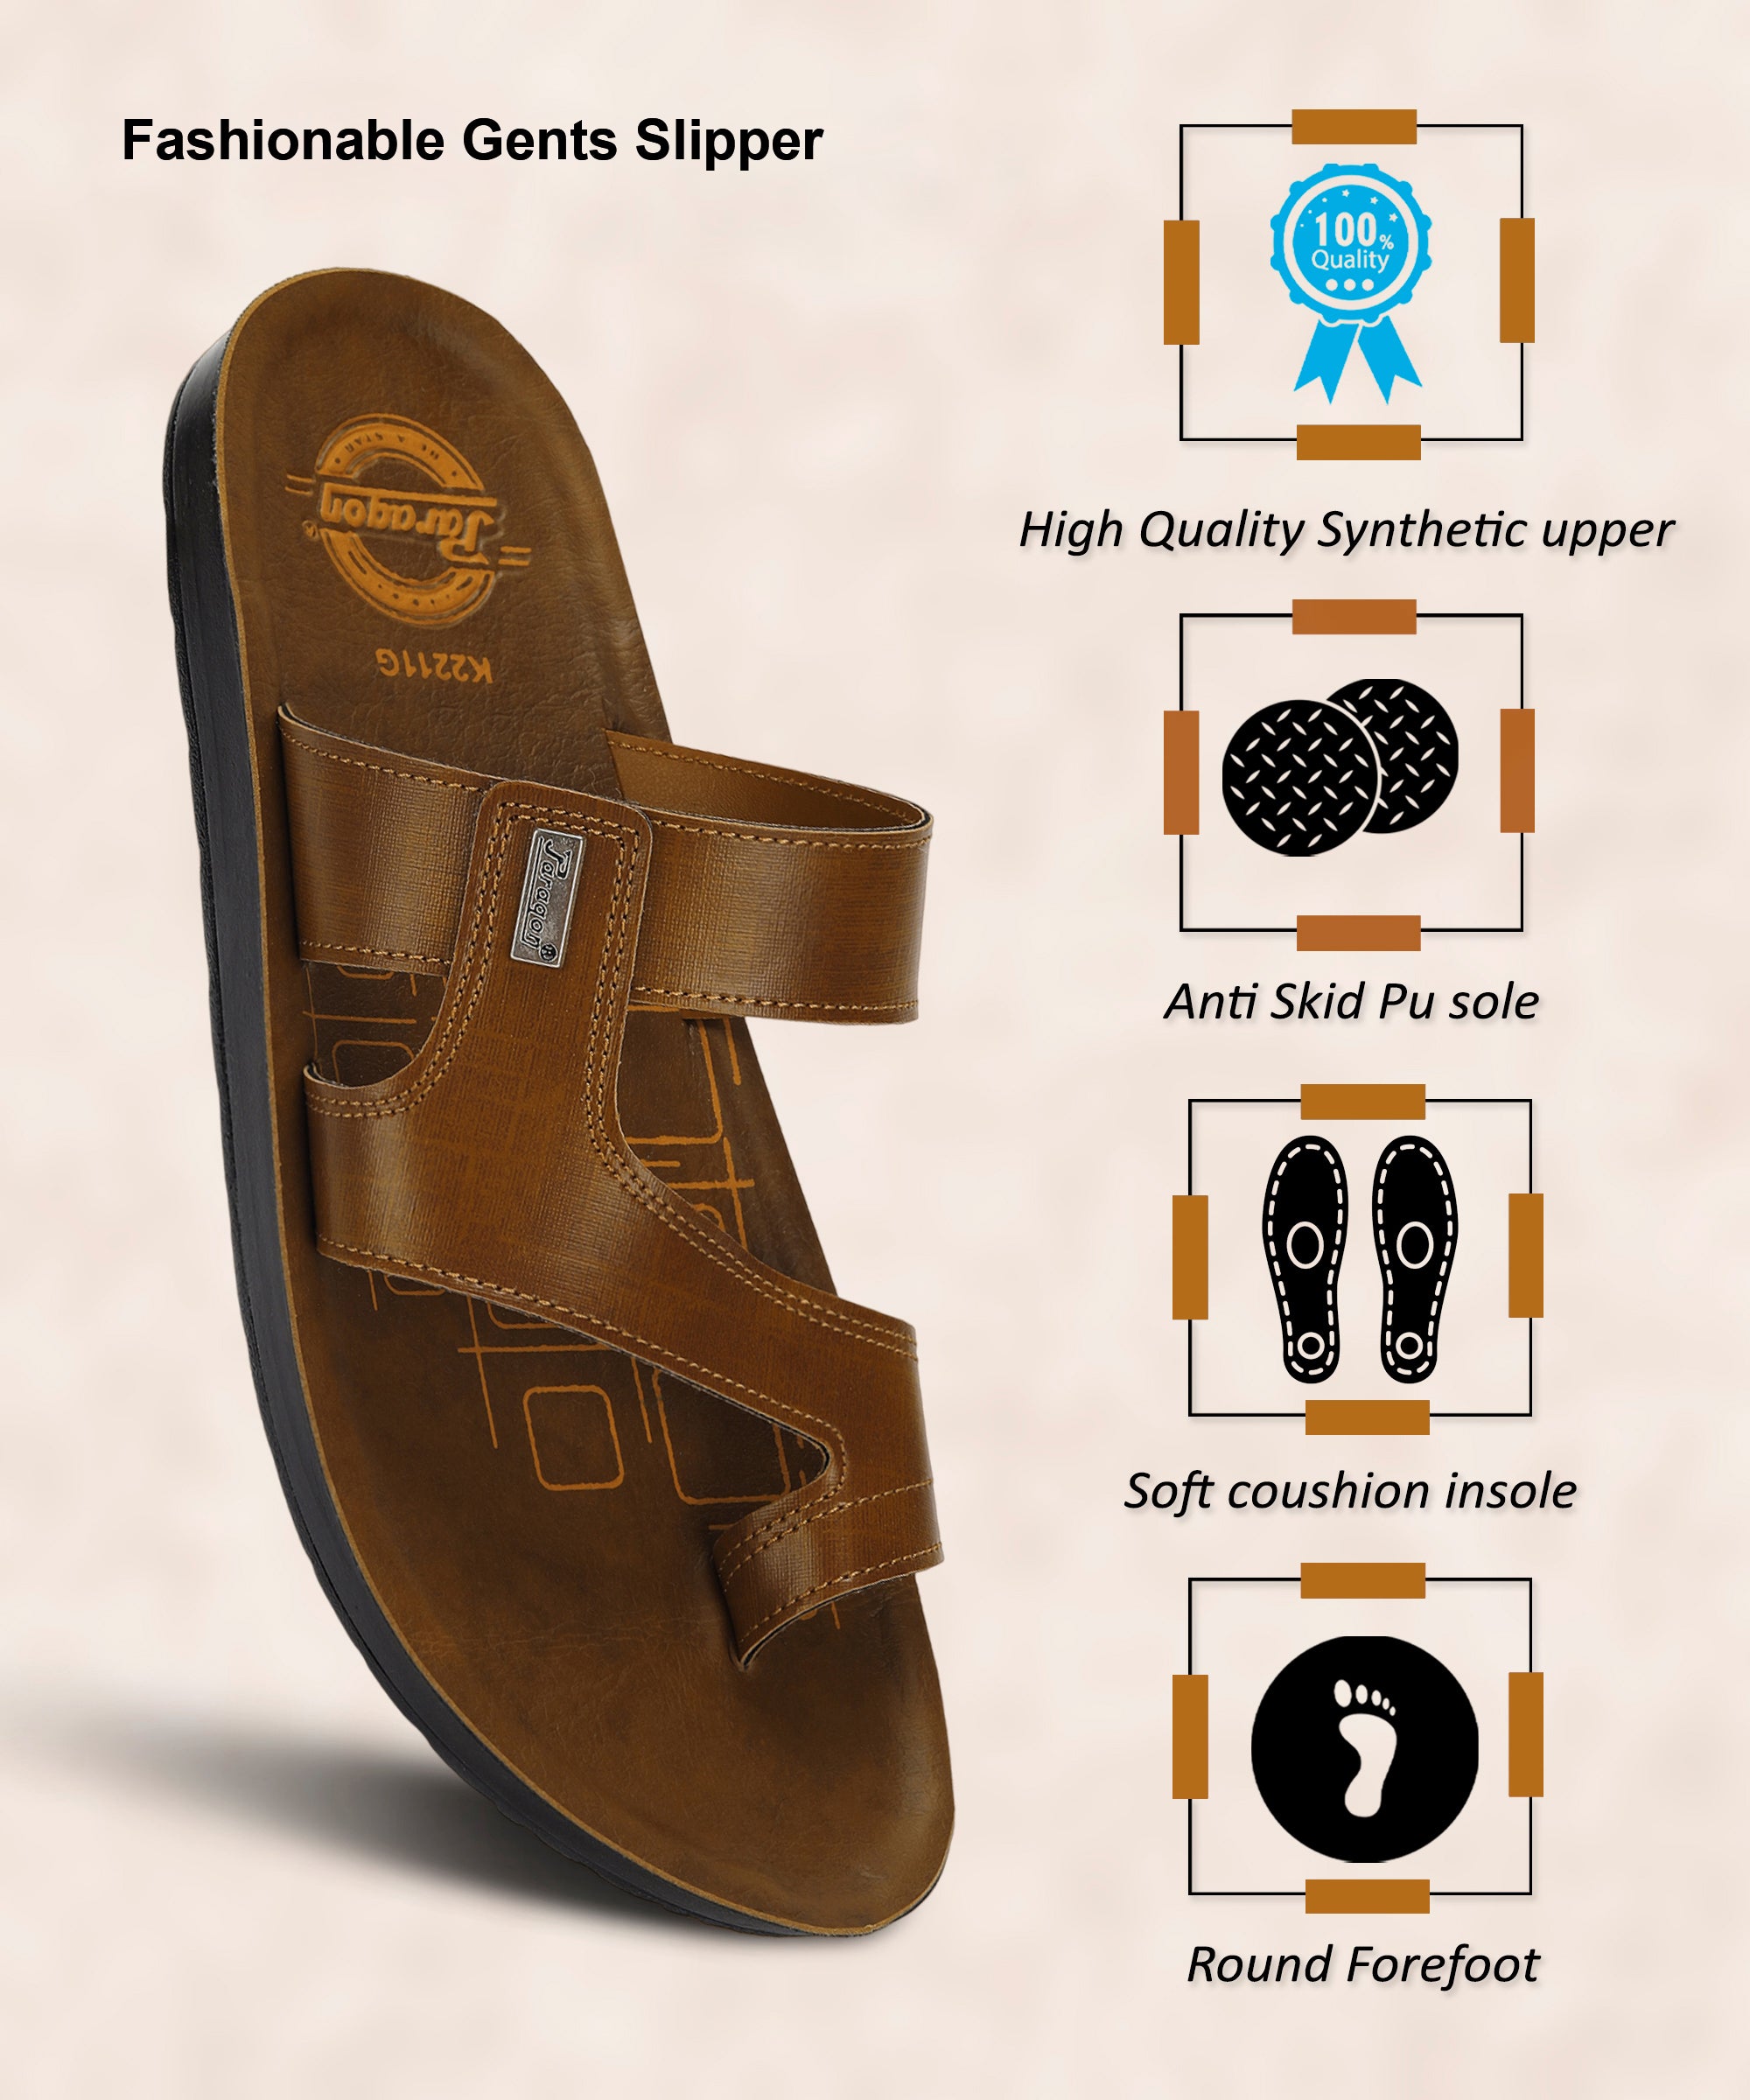 Paragon  PUK2211G Men Stylish Sandals | Comfortable Sandals for Daily Outdoor Use | Casual Formal Sandals with Cushioned Soles